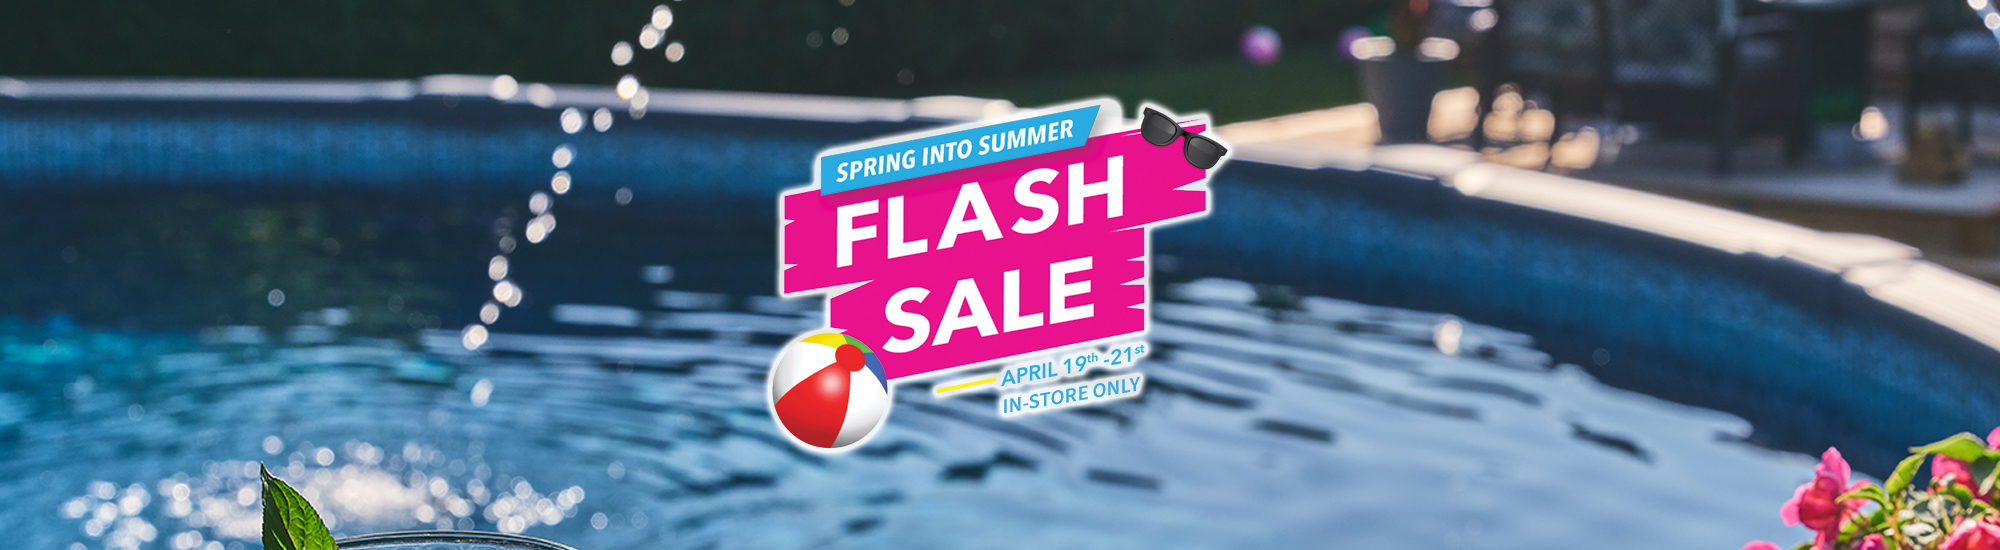 Spring Into Summer Flash Sale